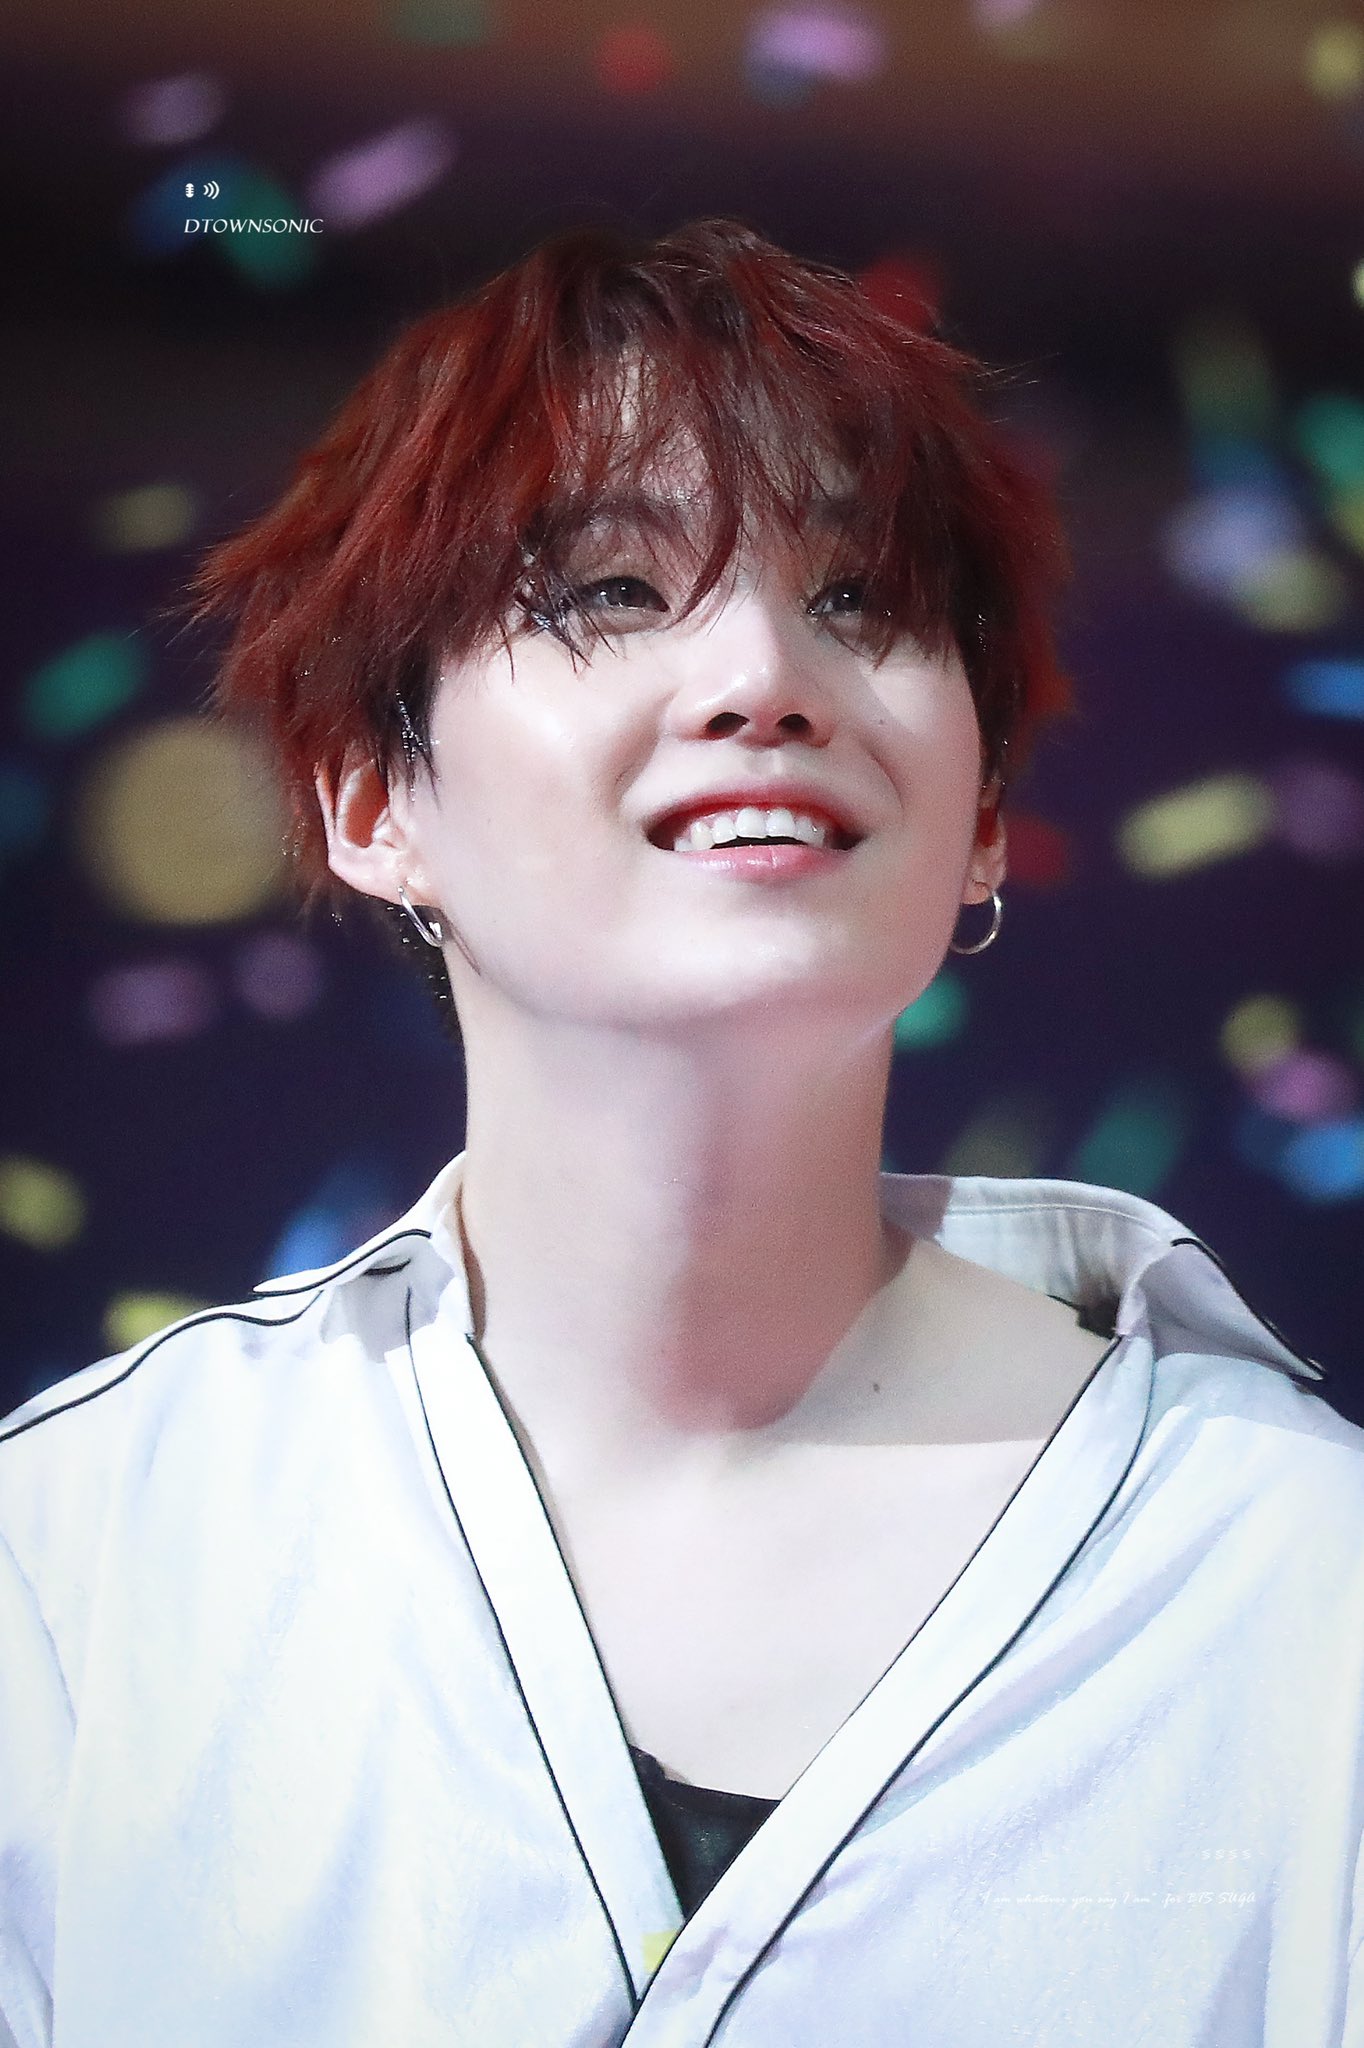 22+ Selected Here Are 10+ Photos Of BTS's Suga Dazzling You With His ...